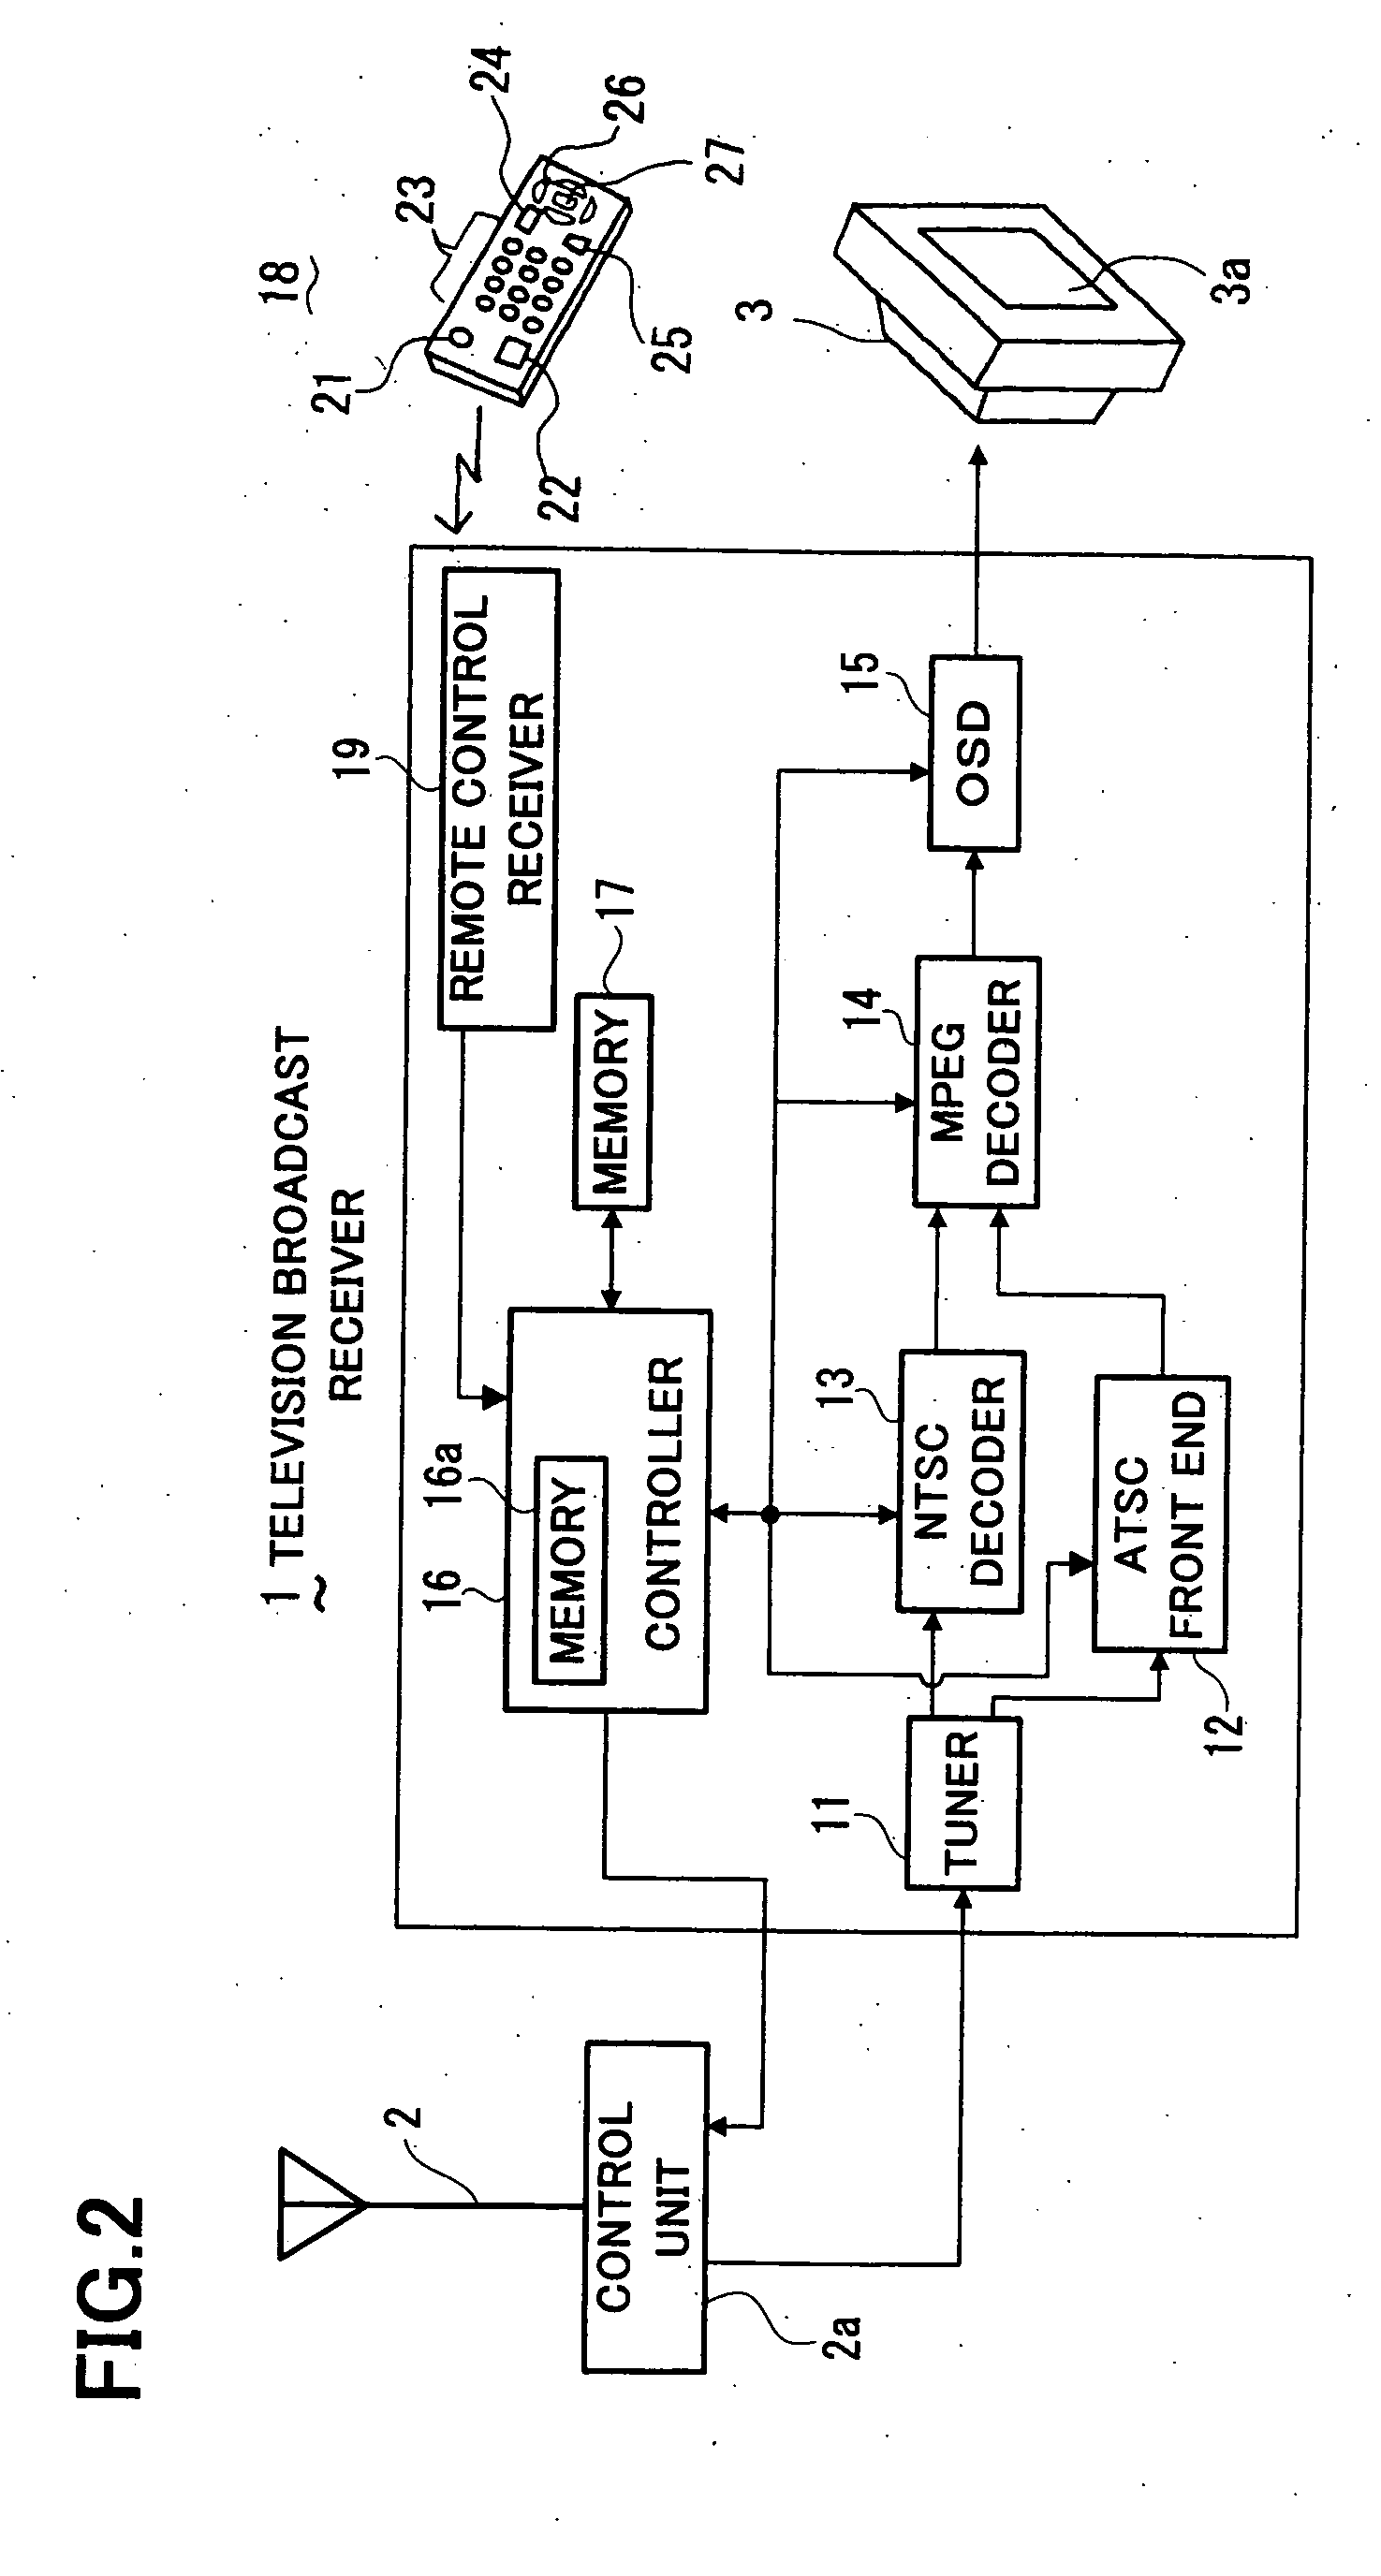 Analog television broadcast signal receiver